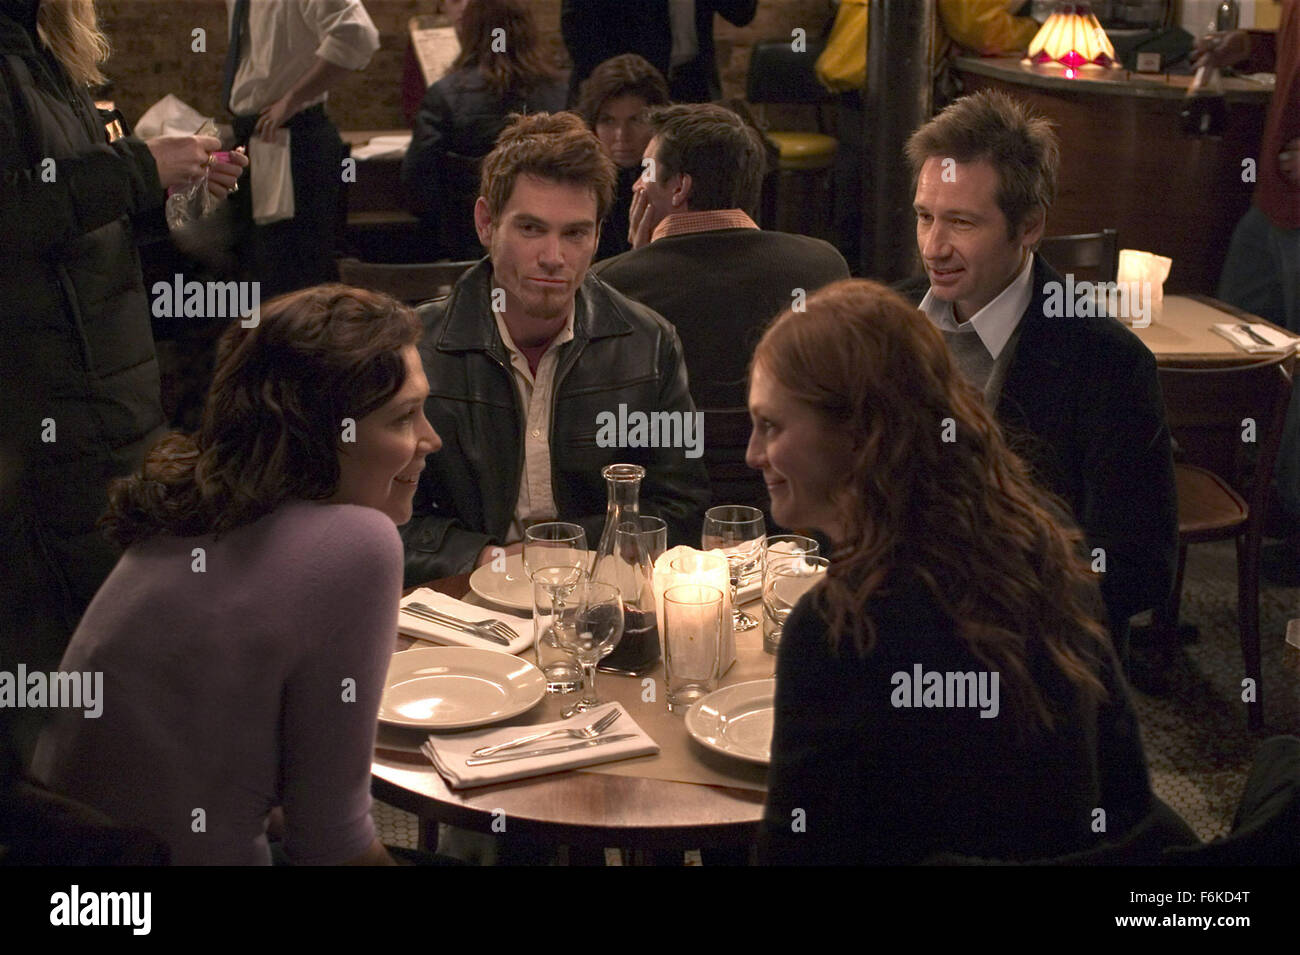 Jun 21, 2006; New York, NY, USA; (L-R): Actress MAGGIE GYLLENHAAL as Elaine, BILLY CRUDUP as Tobey, JULIANNE MOORE as Rebecca and DAVID DUCHOVNY as Tom in the Bart Freundlich directed romantic comedy, 'Trust the Man.' Set to be released Augtust 18, 2006. Mandatory Credit: Photo by 20th Century Fox. (c) Copyright 2006 by Courtesy of 20th Century Fox Stock Photo